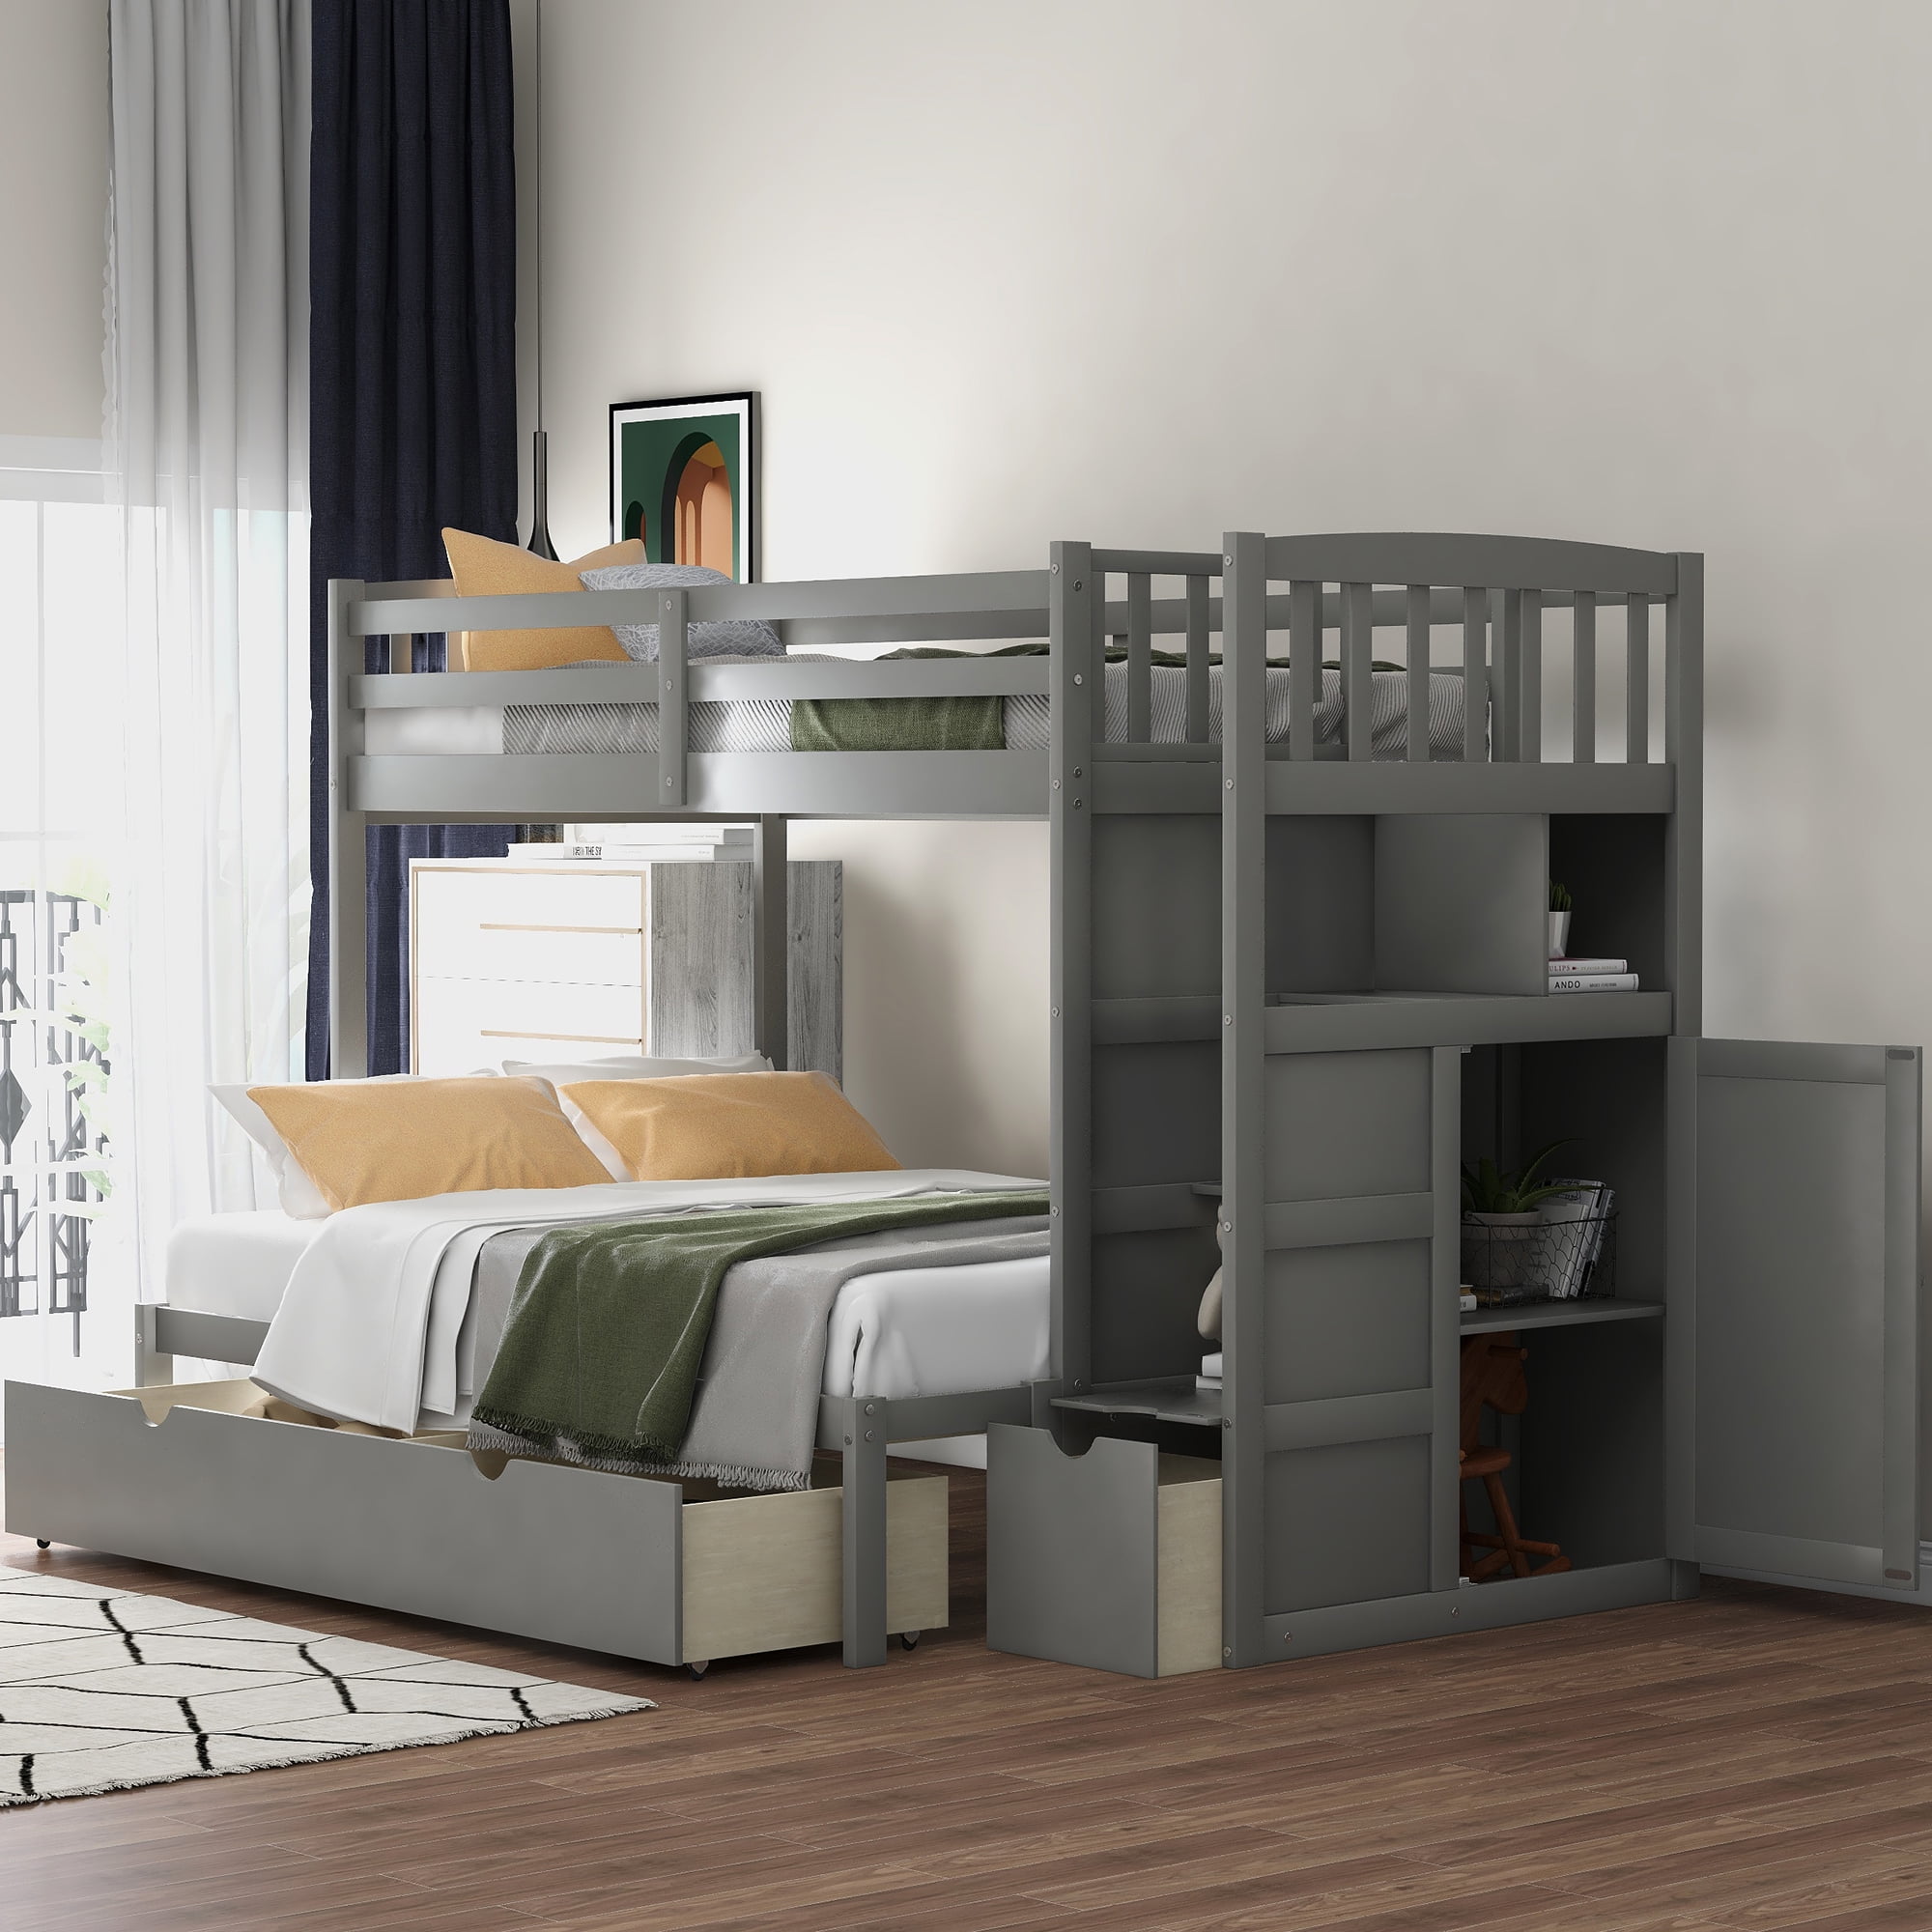 Euroco Twin Over Full Bunk Bed, Twin Loft Bed With Dresser Underneath